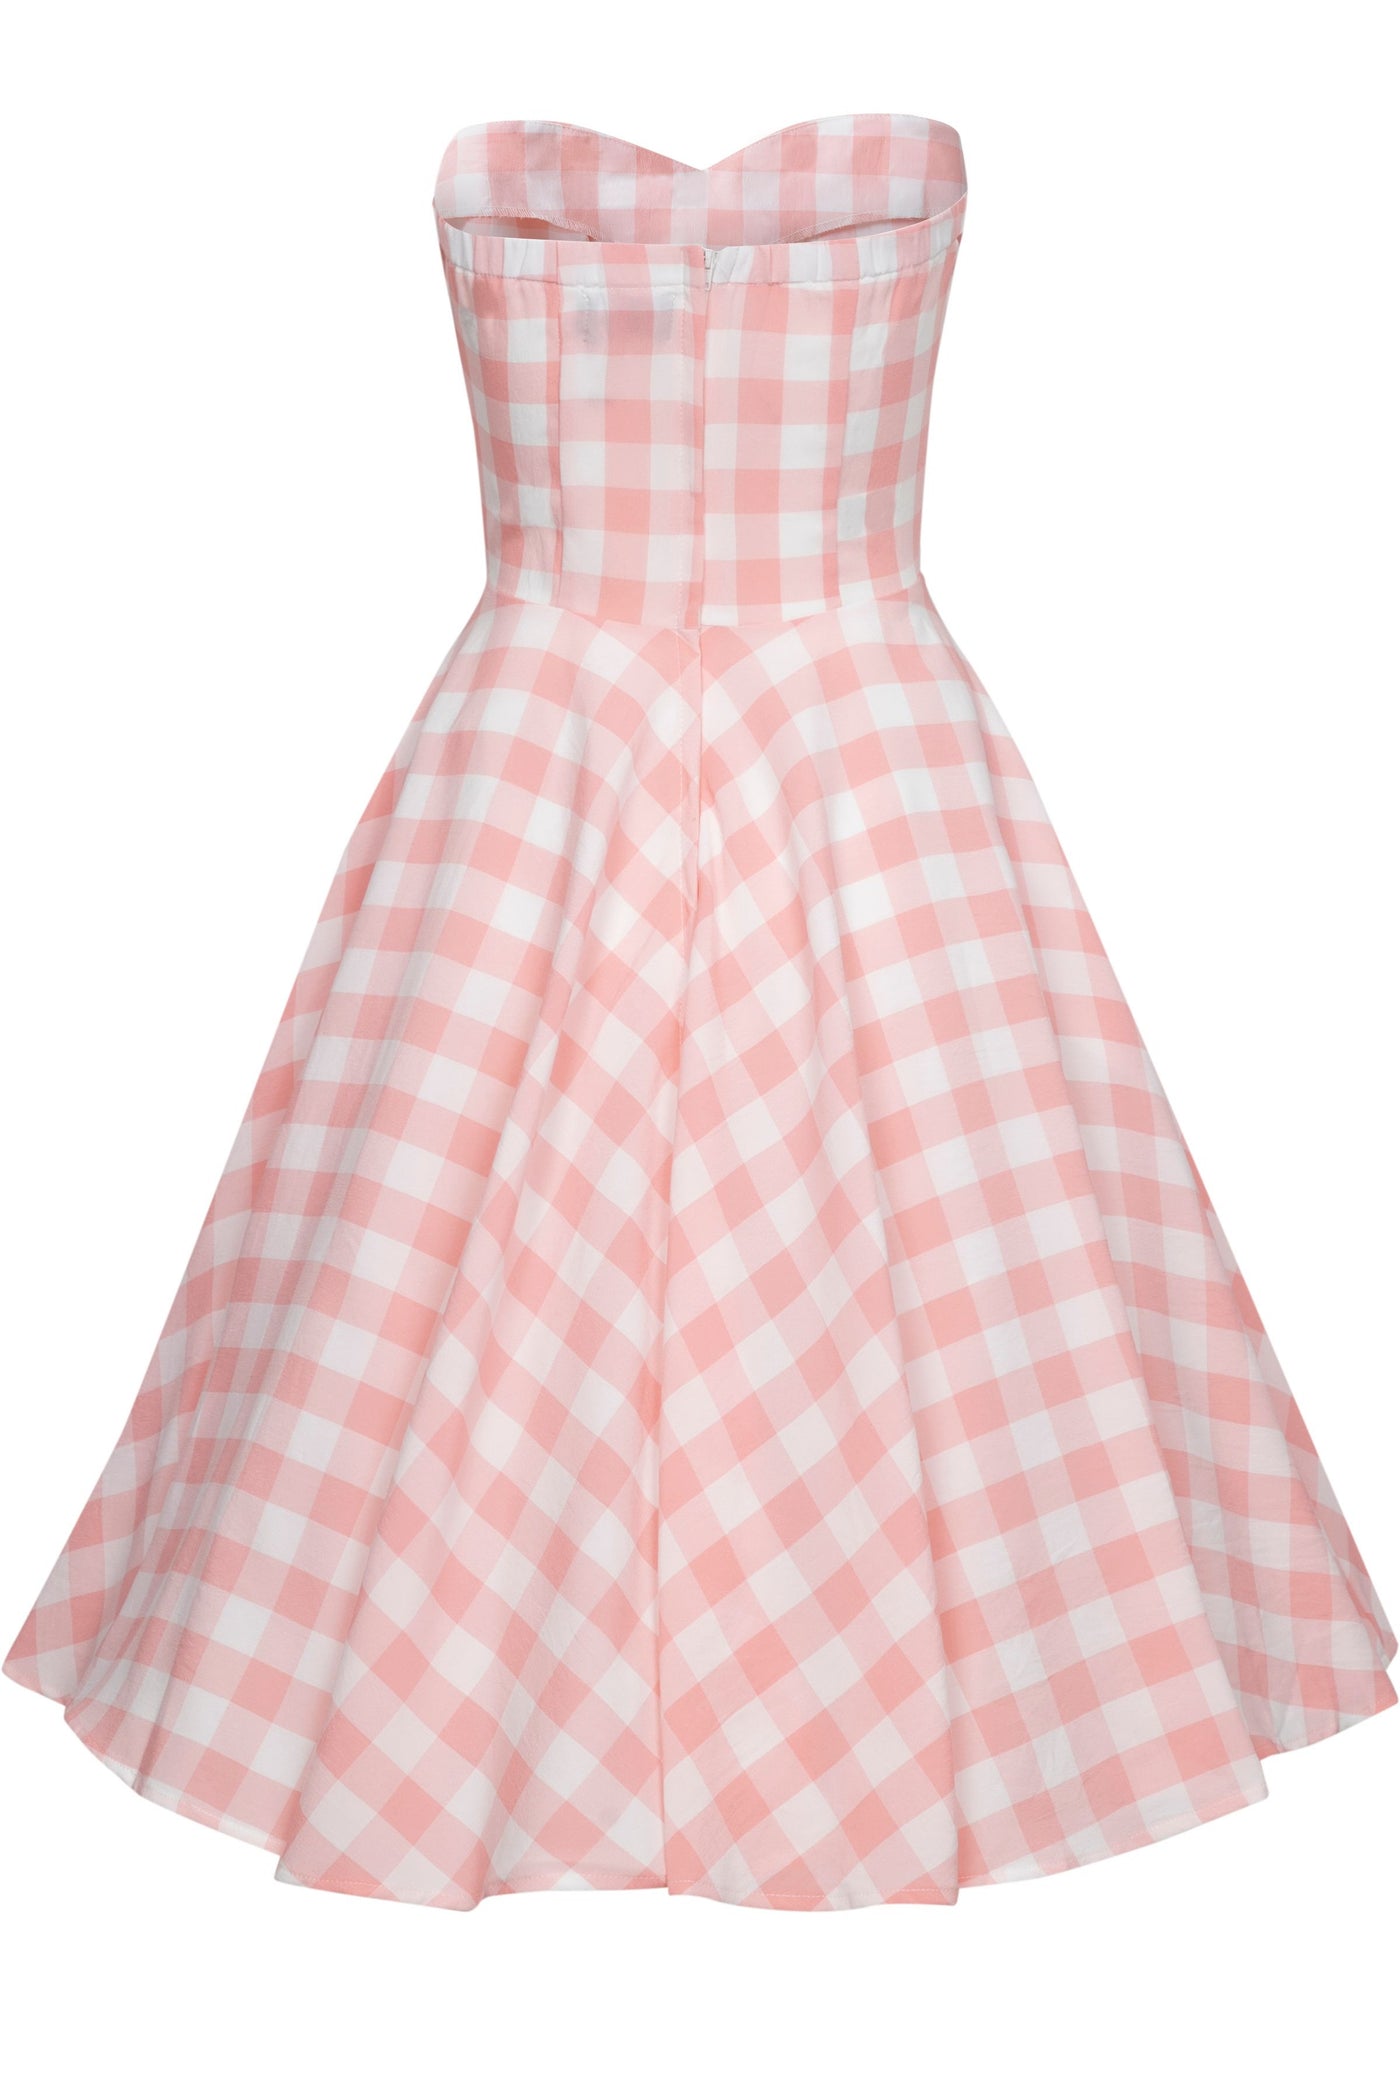 Strapless flared dress in pink gingham check print back view